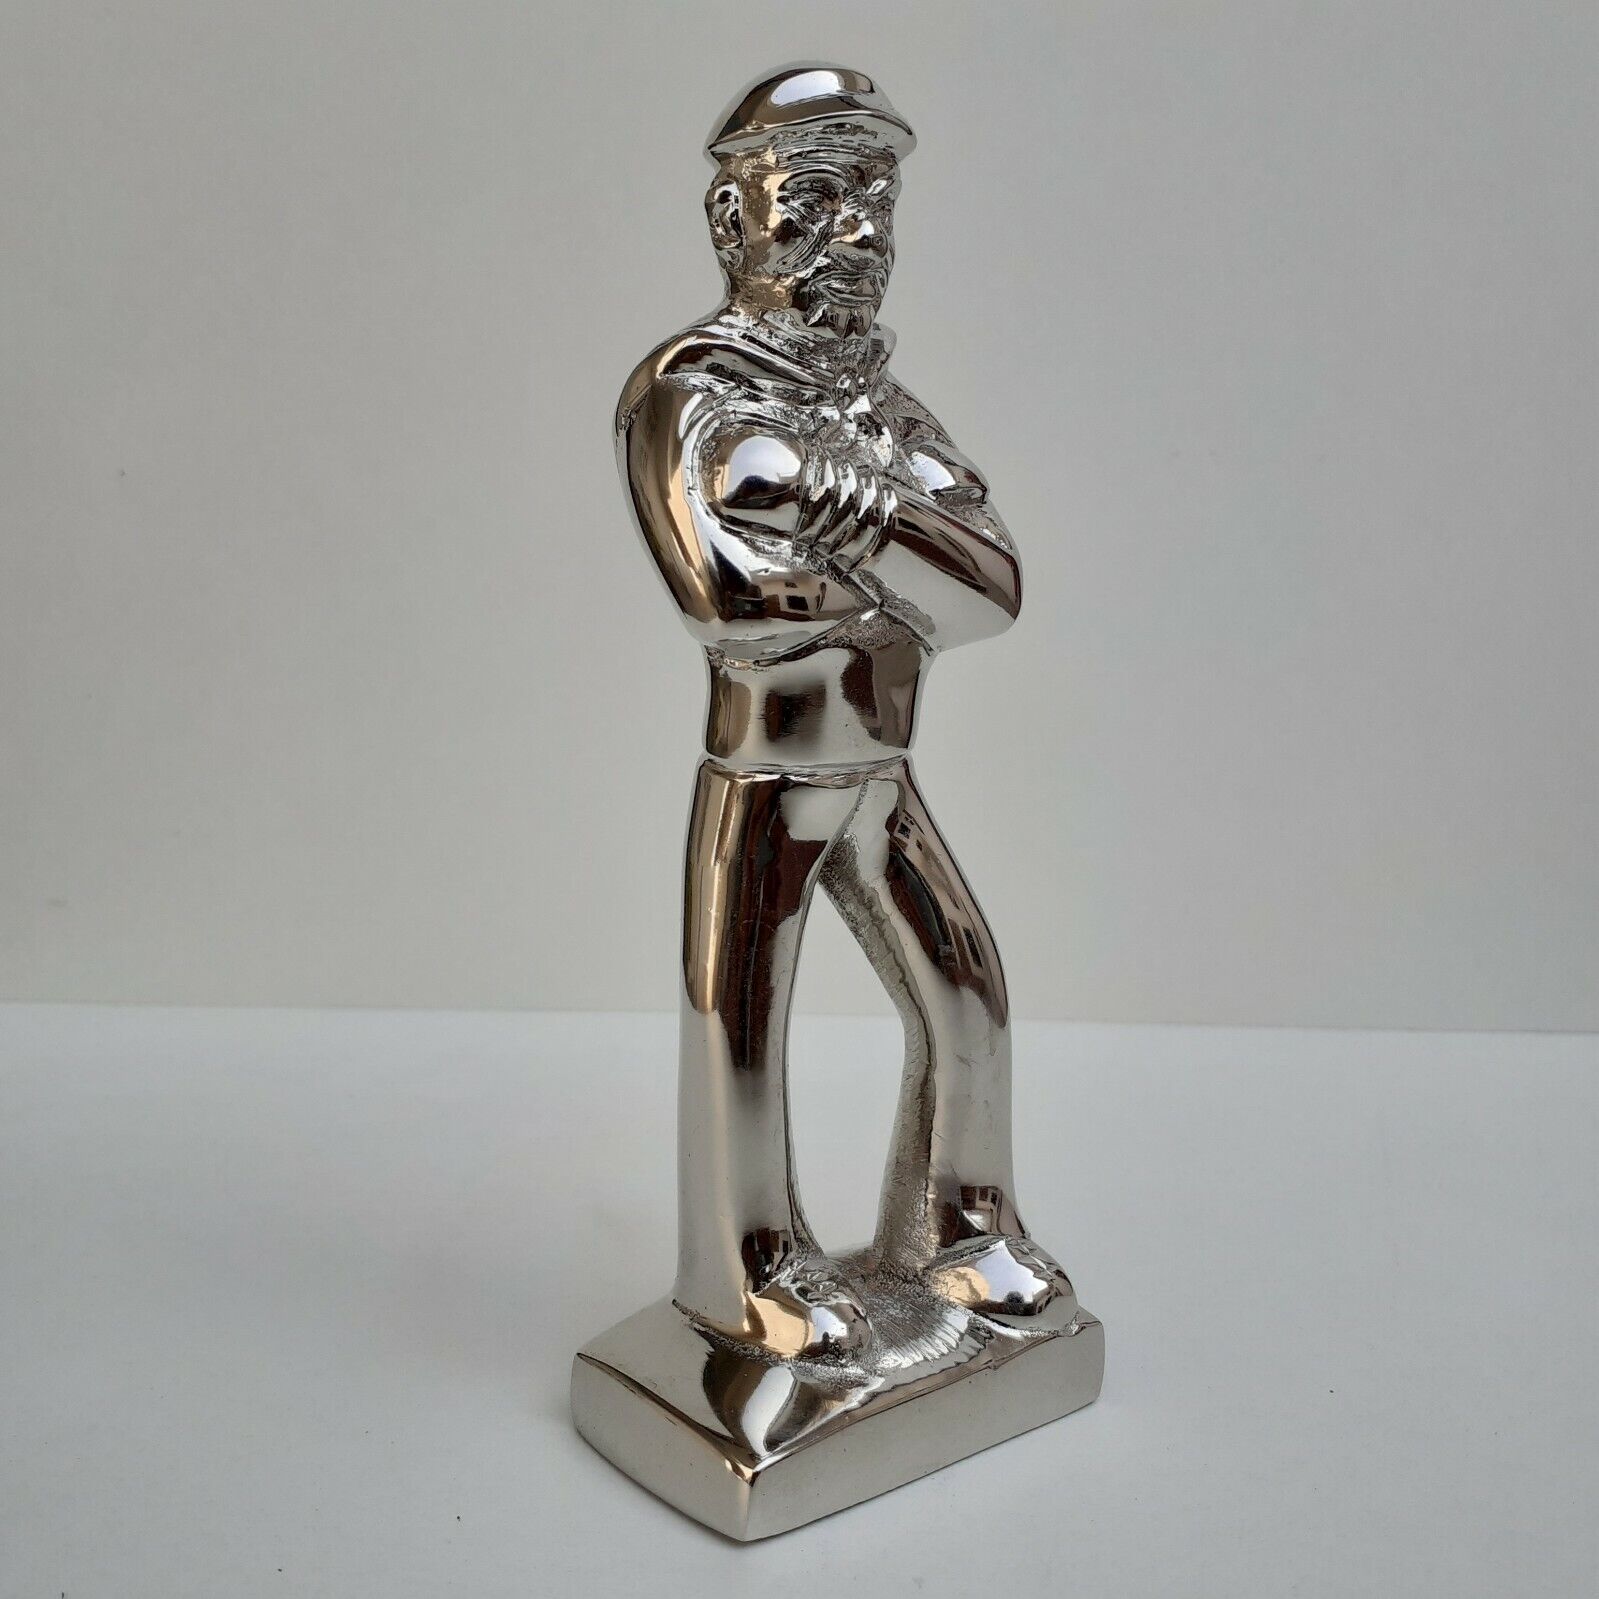 Chrome Plated Popeyes The Sailor Man Brass Statue Self Standing Collectible Gift